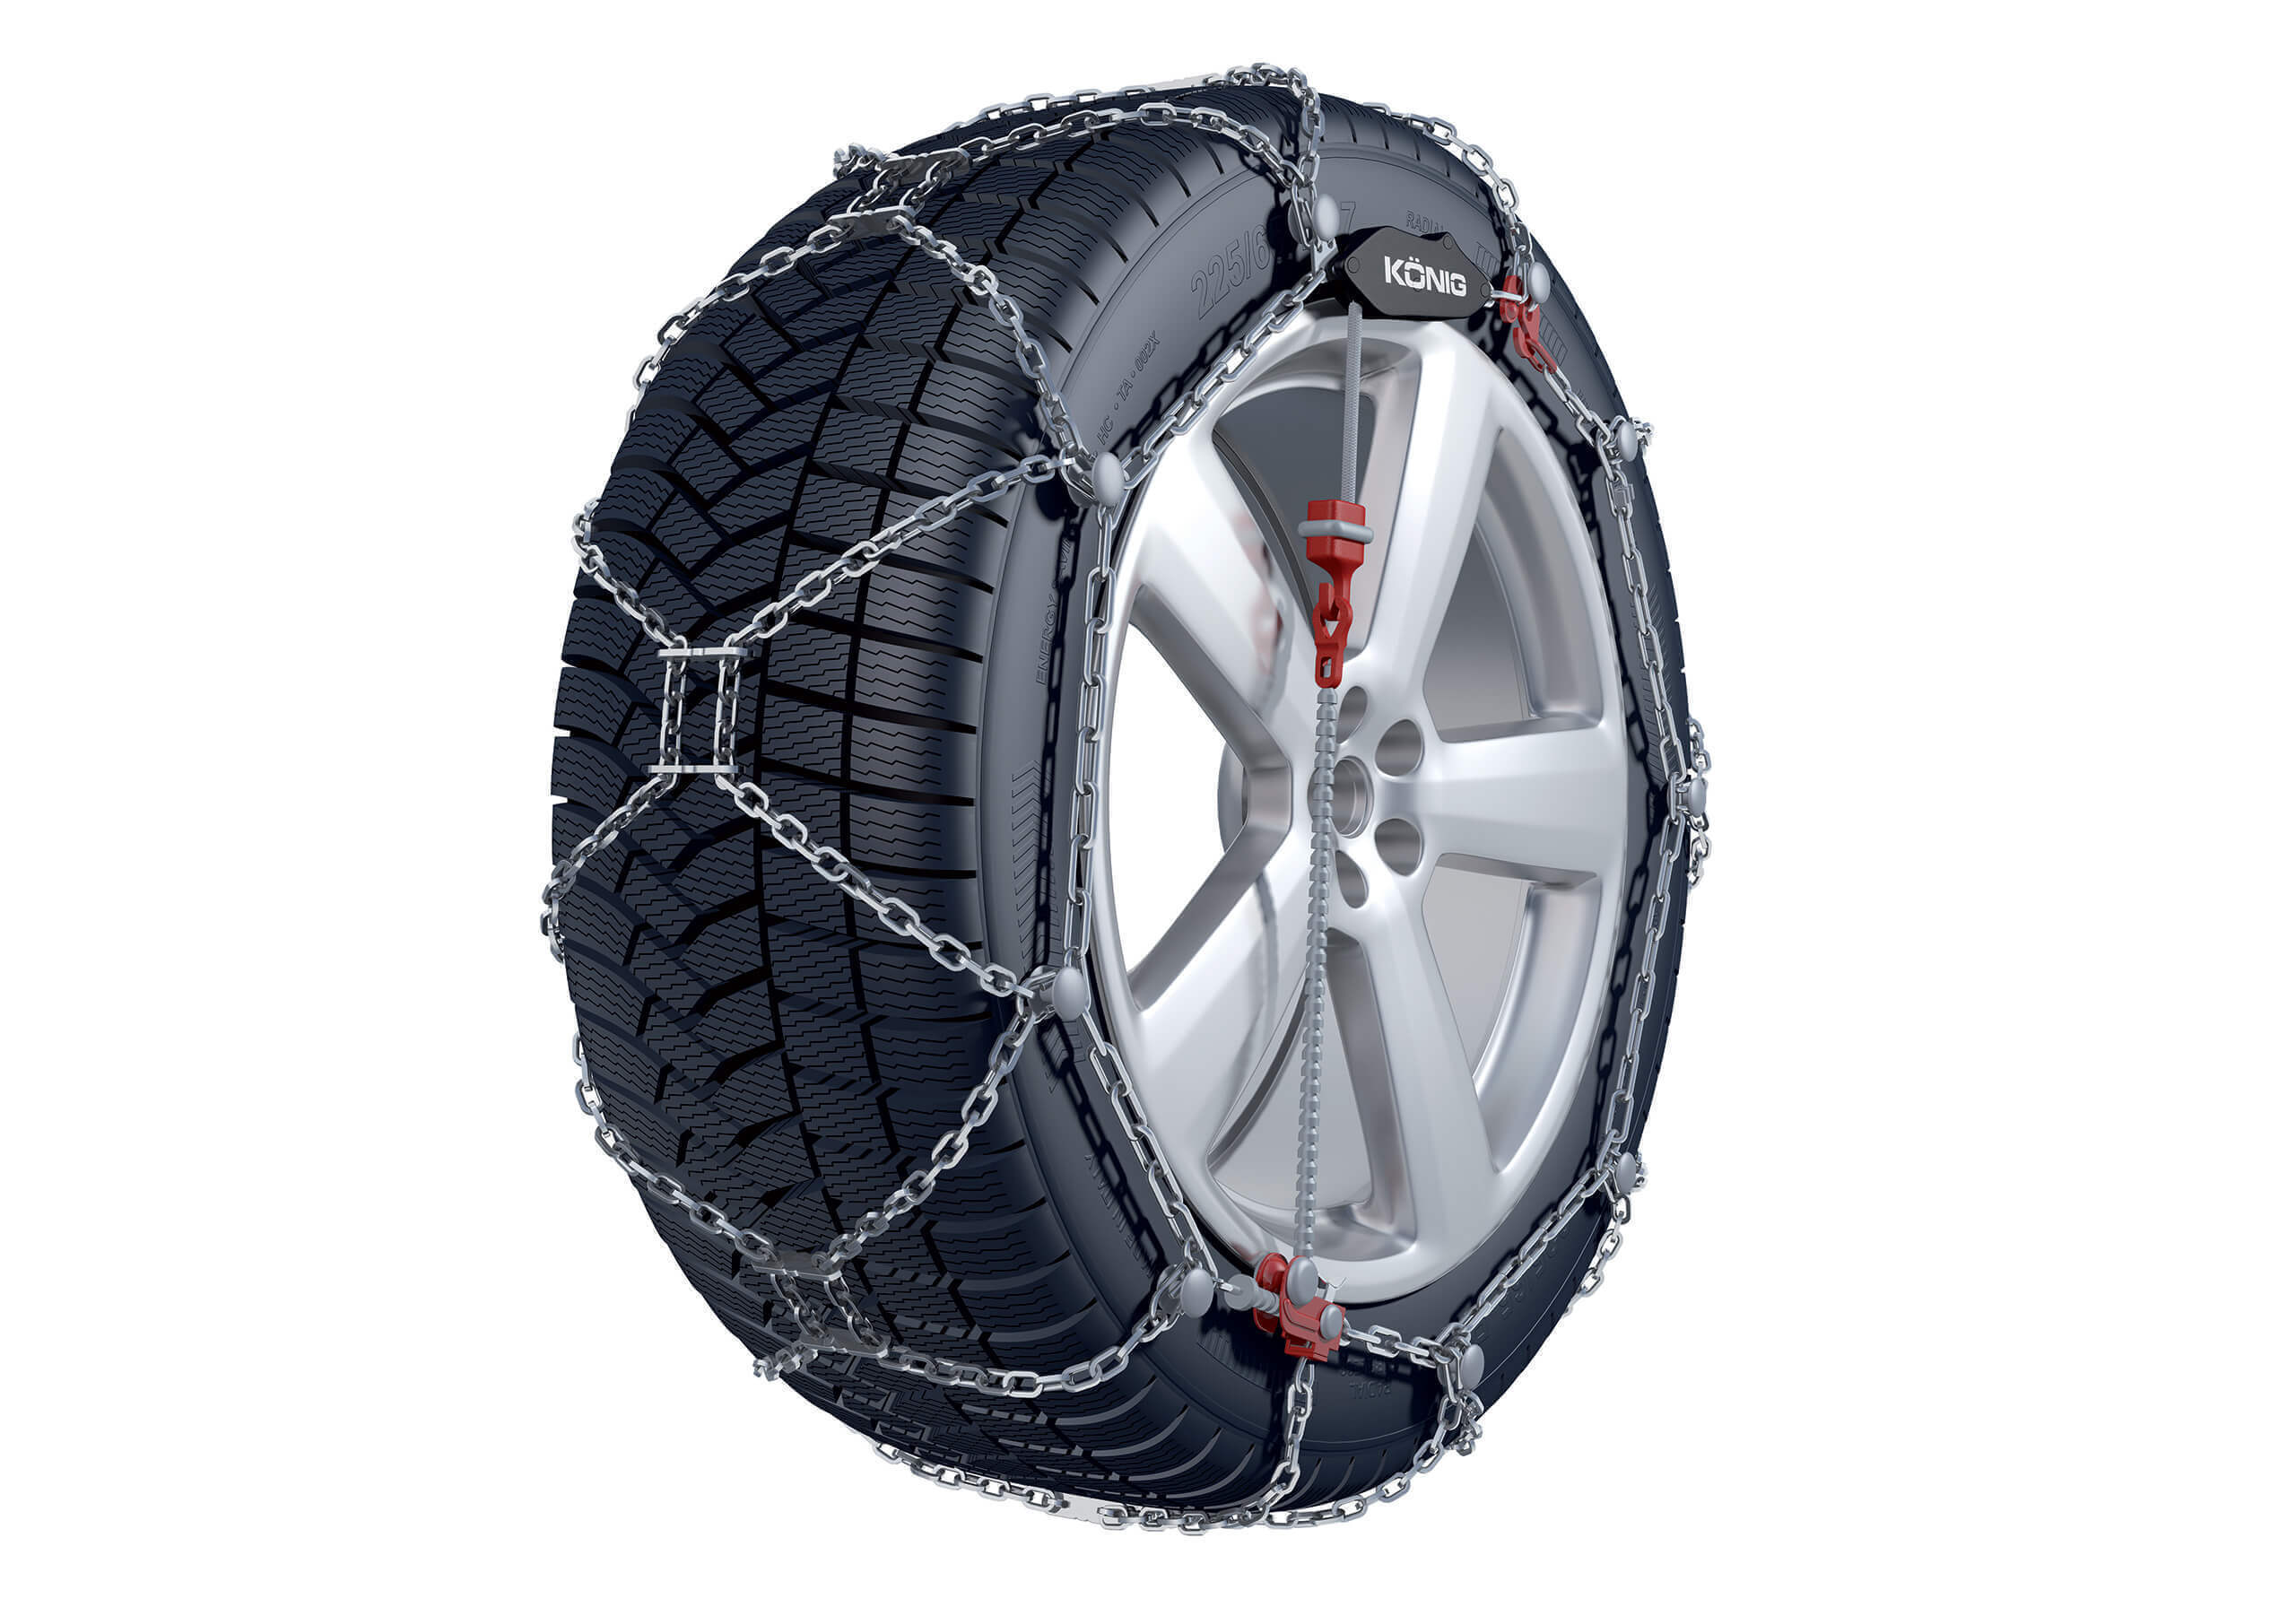 Iveco Daily L1 H2 (2006 to 2014):Knig XG-12 Pro snow chains (pair) no. KGXG-12 Pro 220